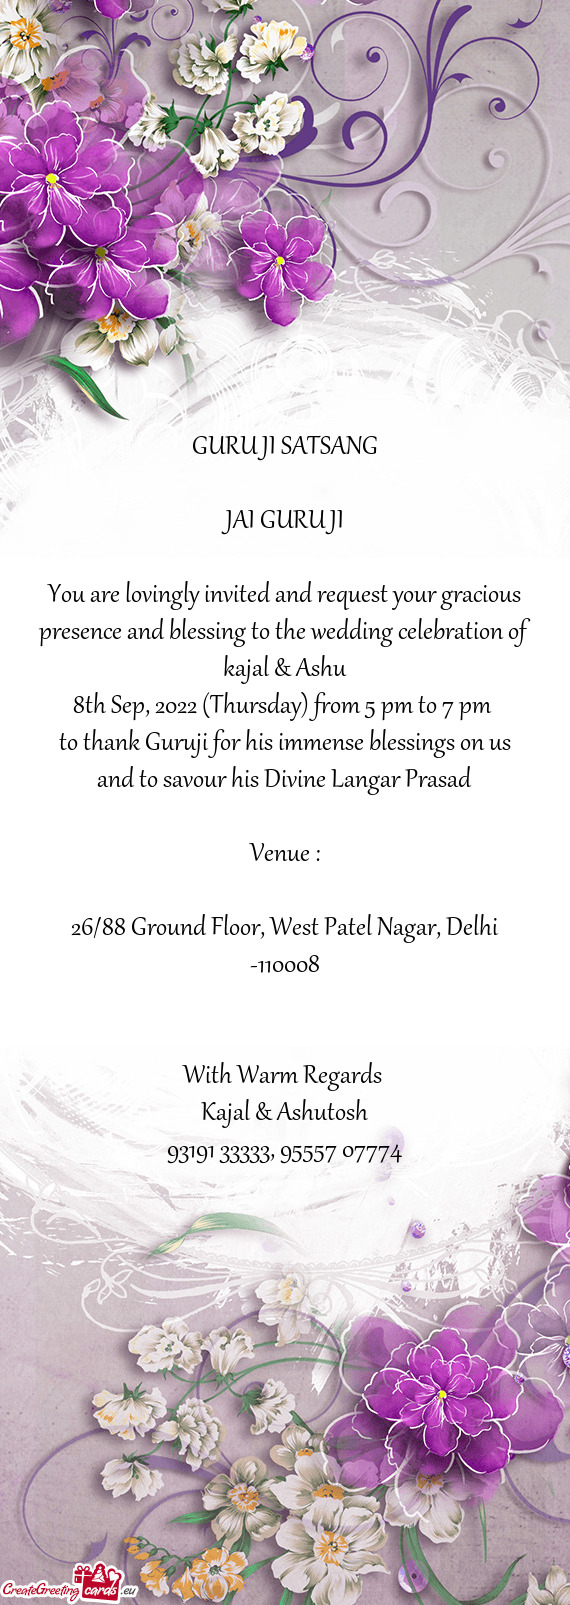 You are lovingly invited and request your gracious presence and blessing to the wedding celebration